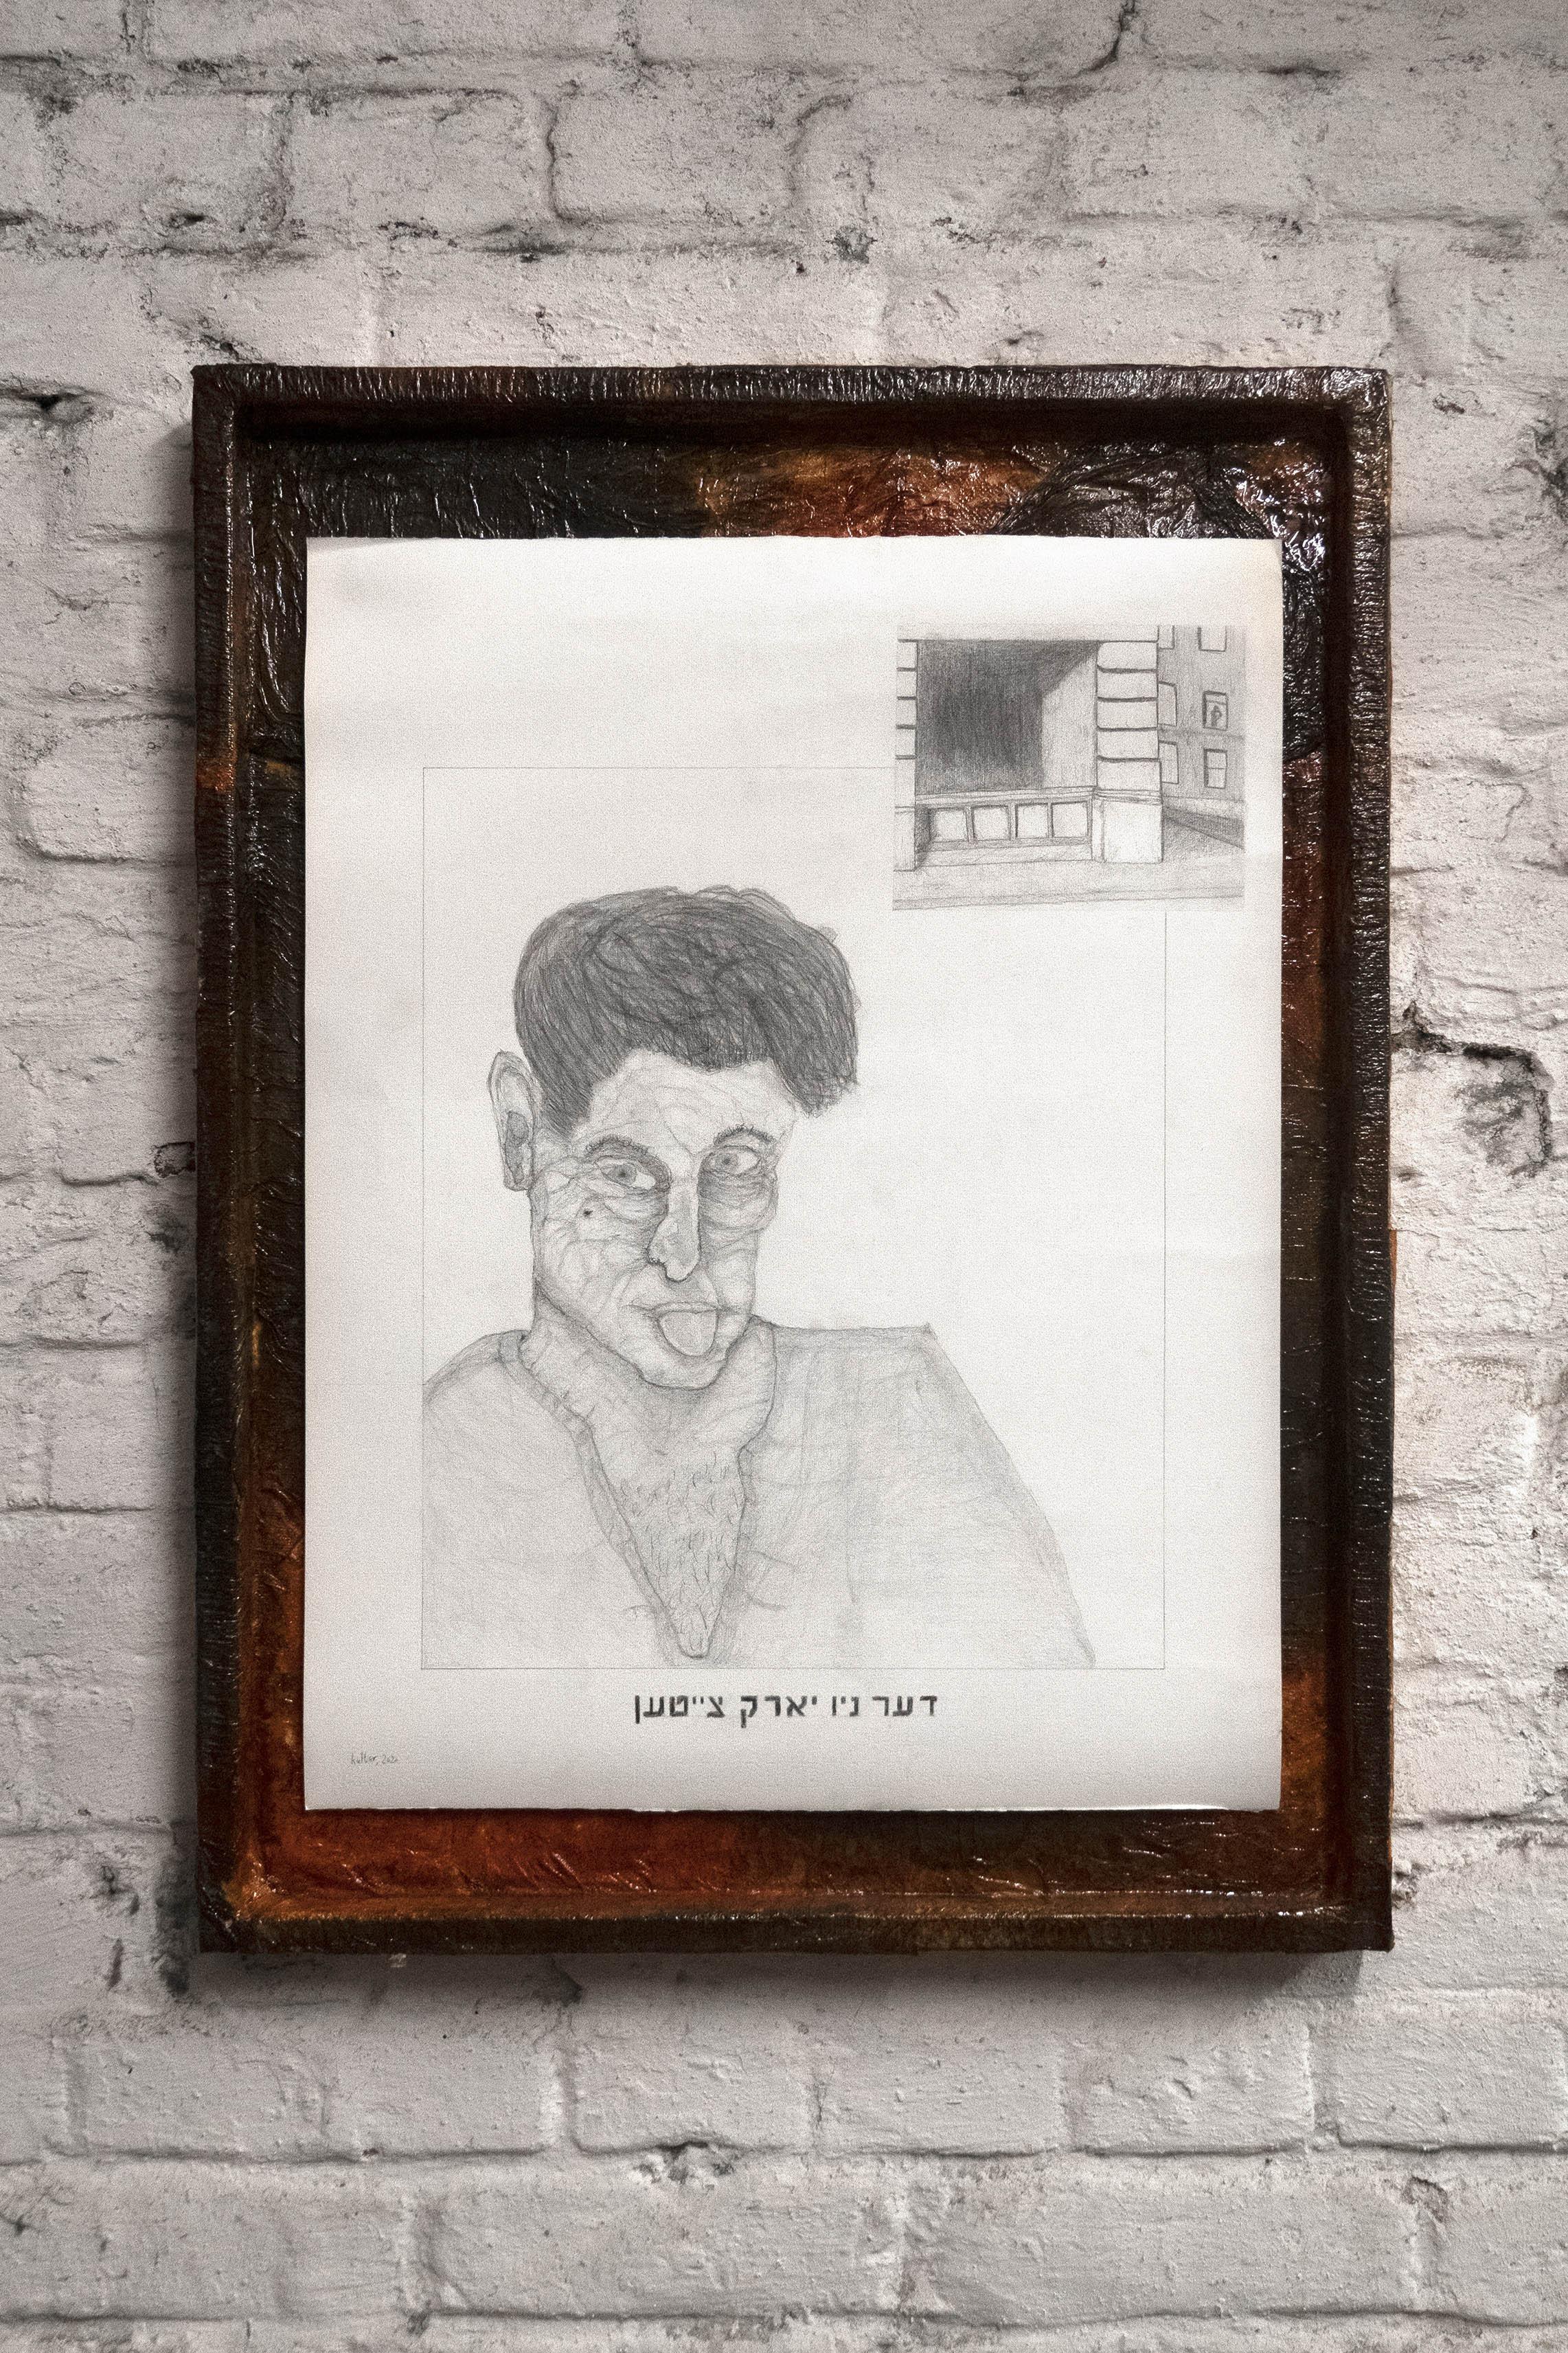 I. S. Kalter, "The New York Times", 2020â€“22. Pencil and graphite on paper, artist frame, 65x50 cm (with frame, 80x60x4 cm)